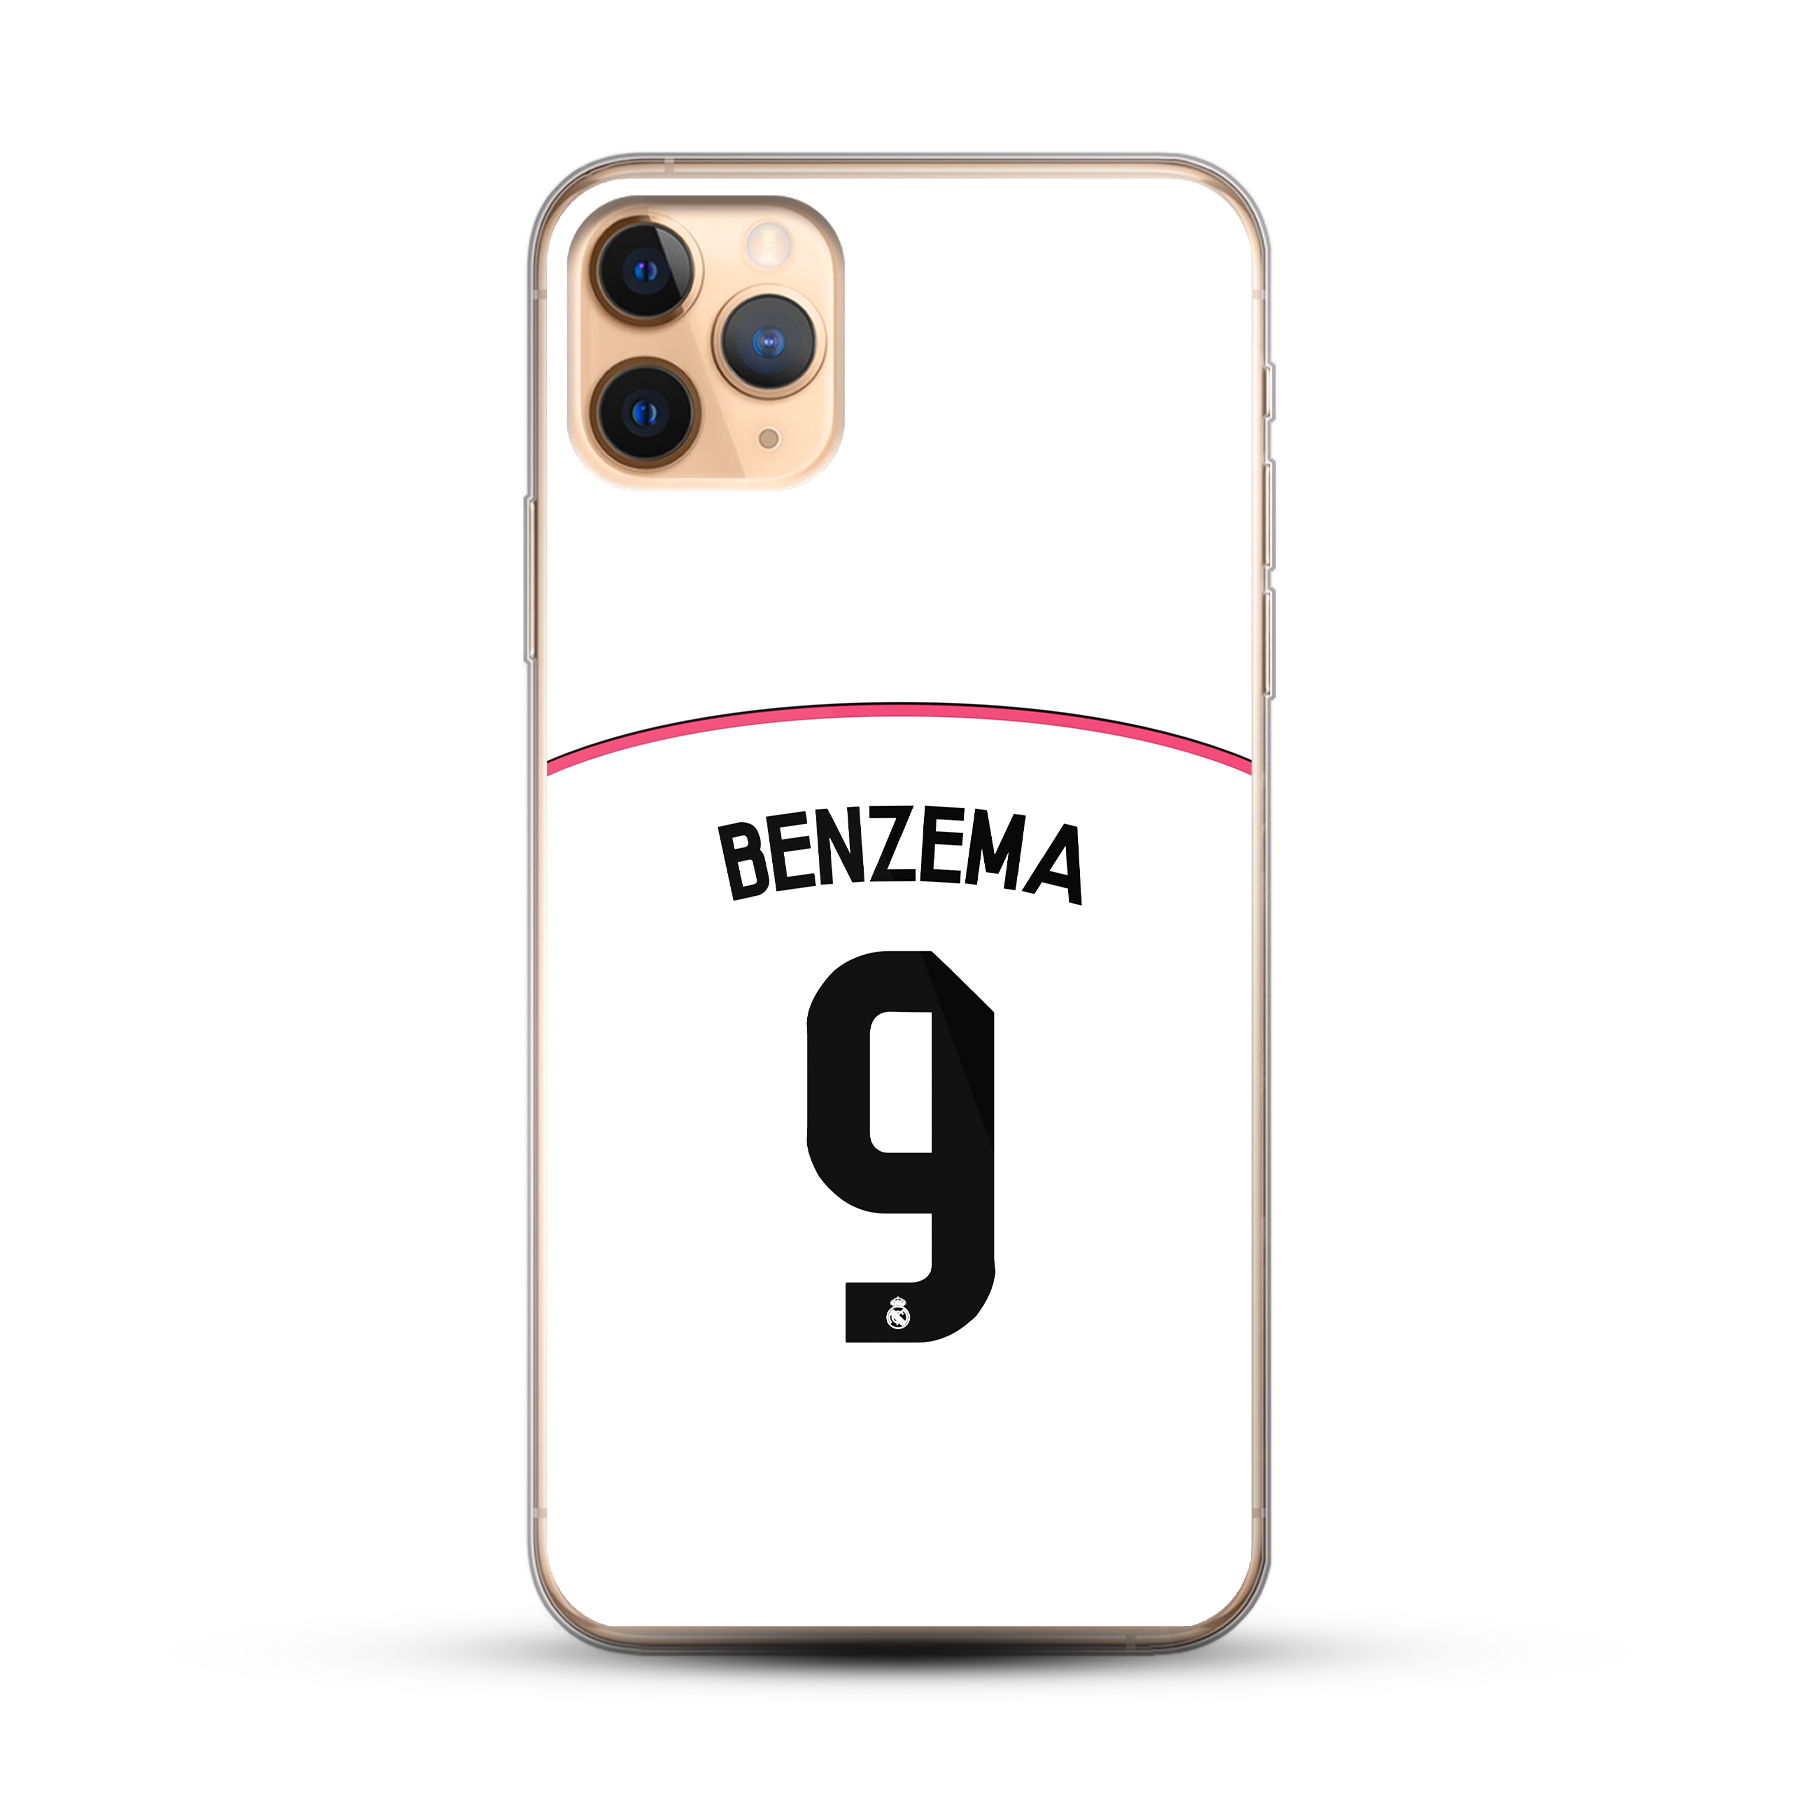 Real Madrid 2014/15 - Home Kit Phone Case